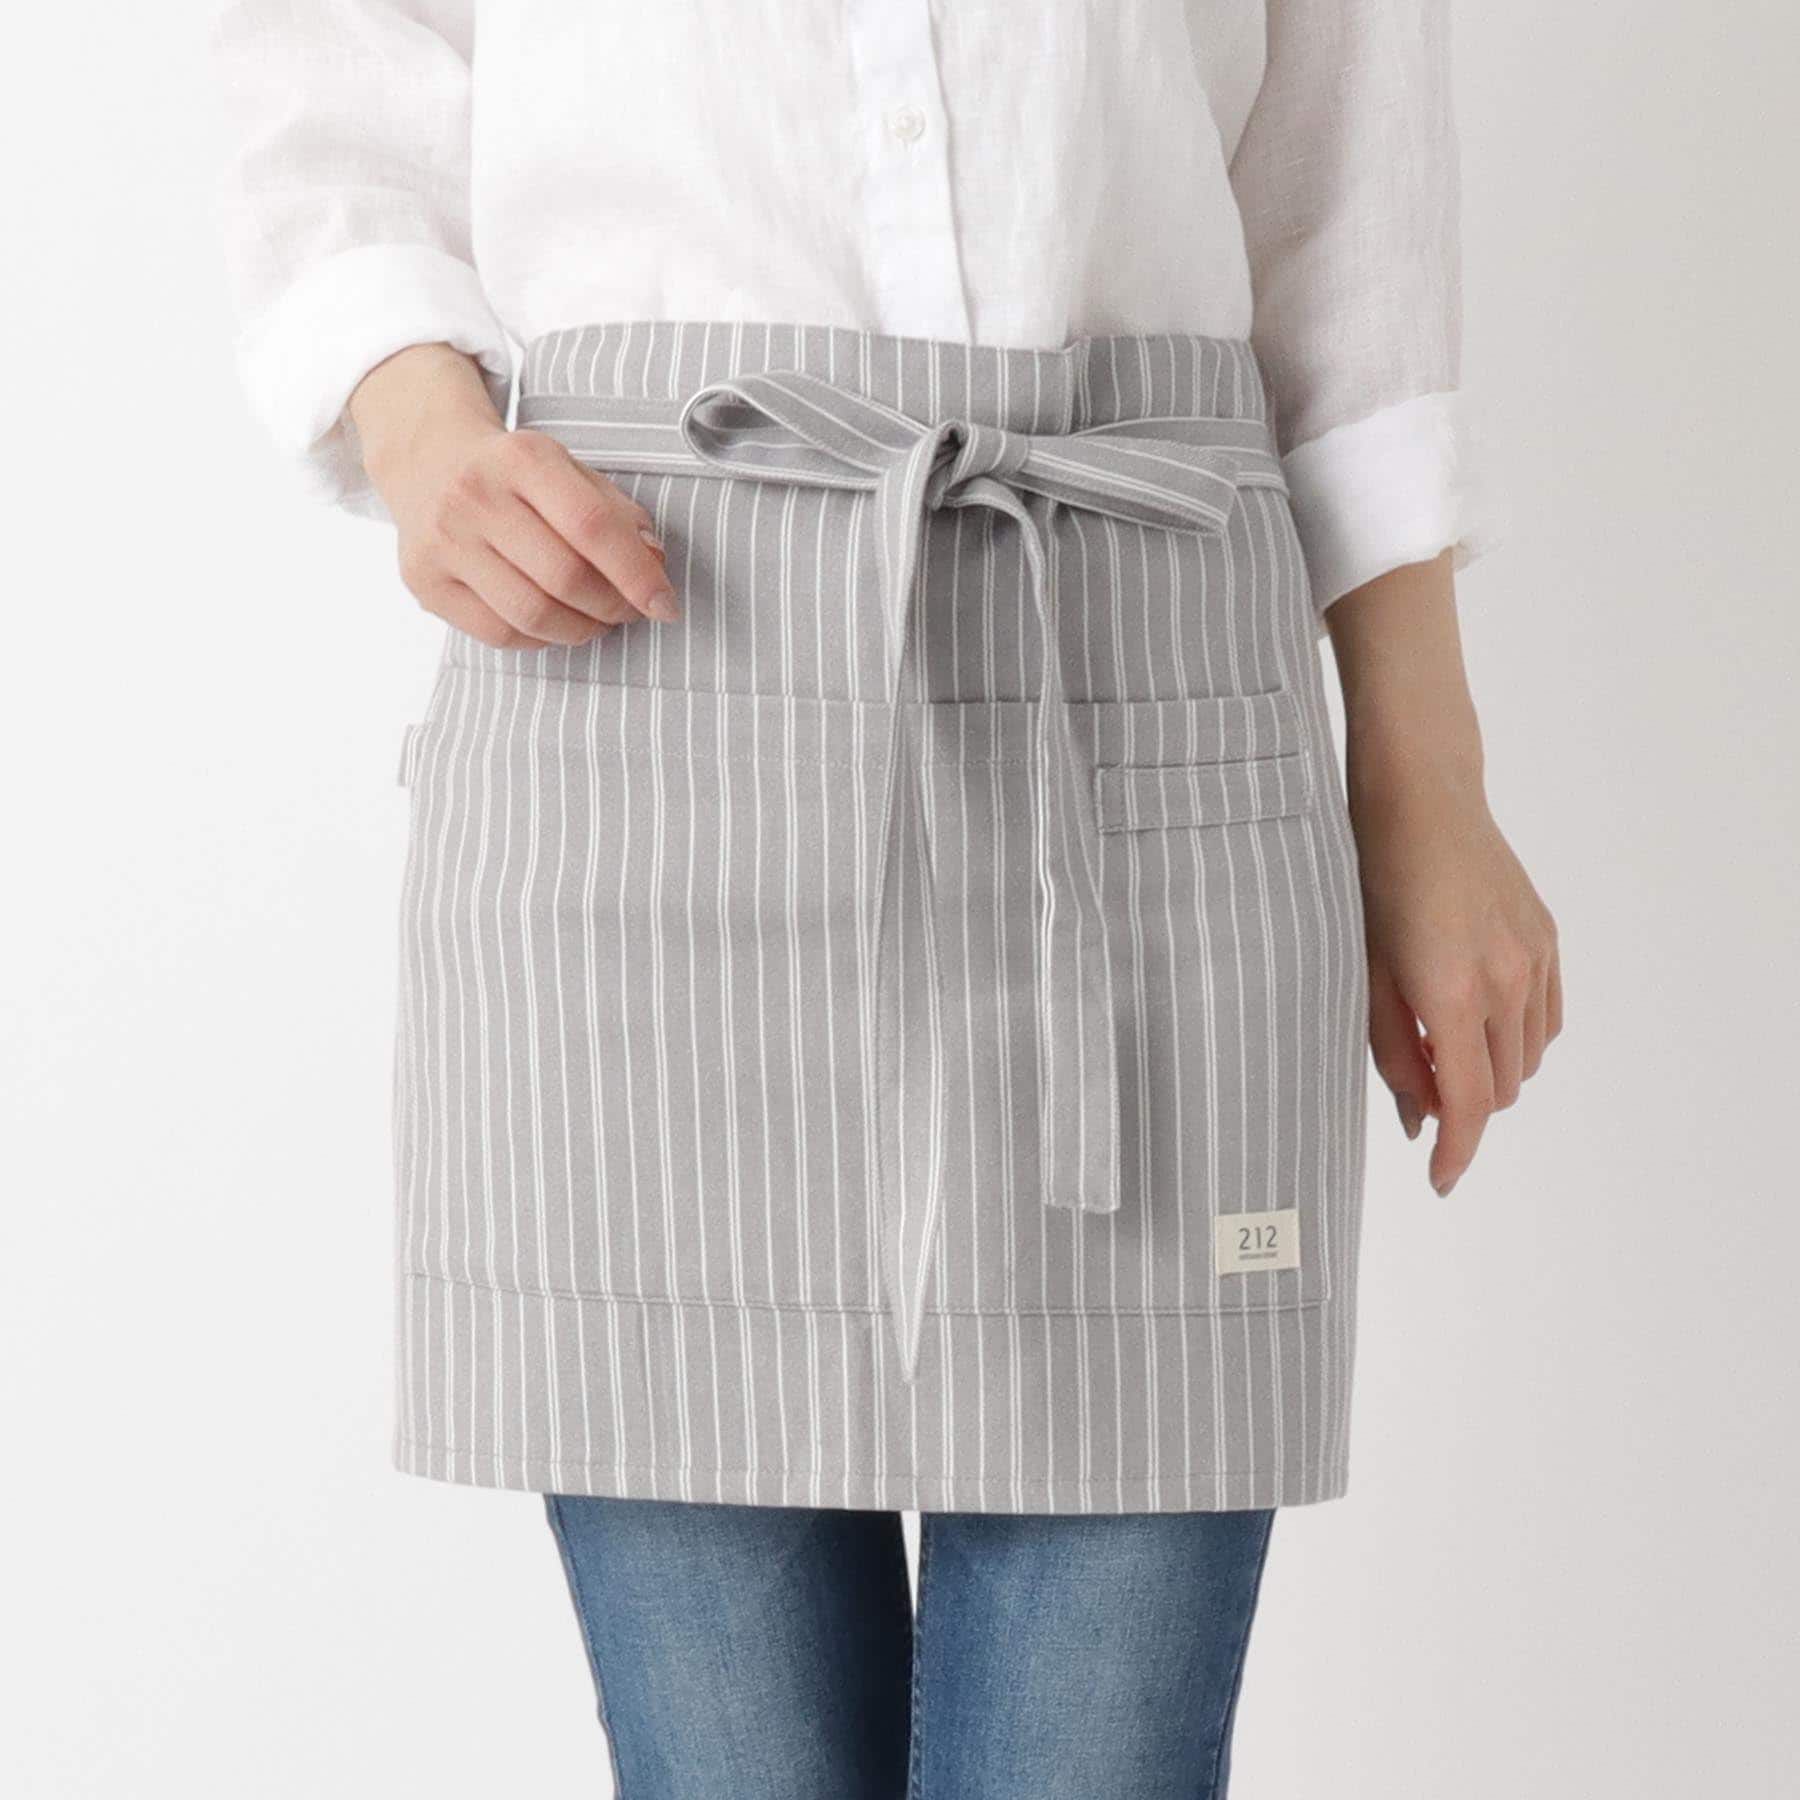  212 KITCHEN STORE(トゥーワントゥーキッチンストア)/Simple Stripe カフェエプロン GY  